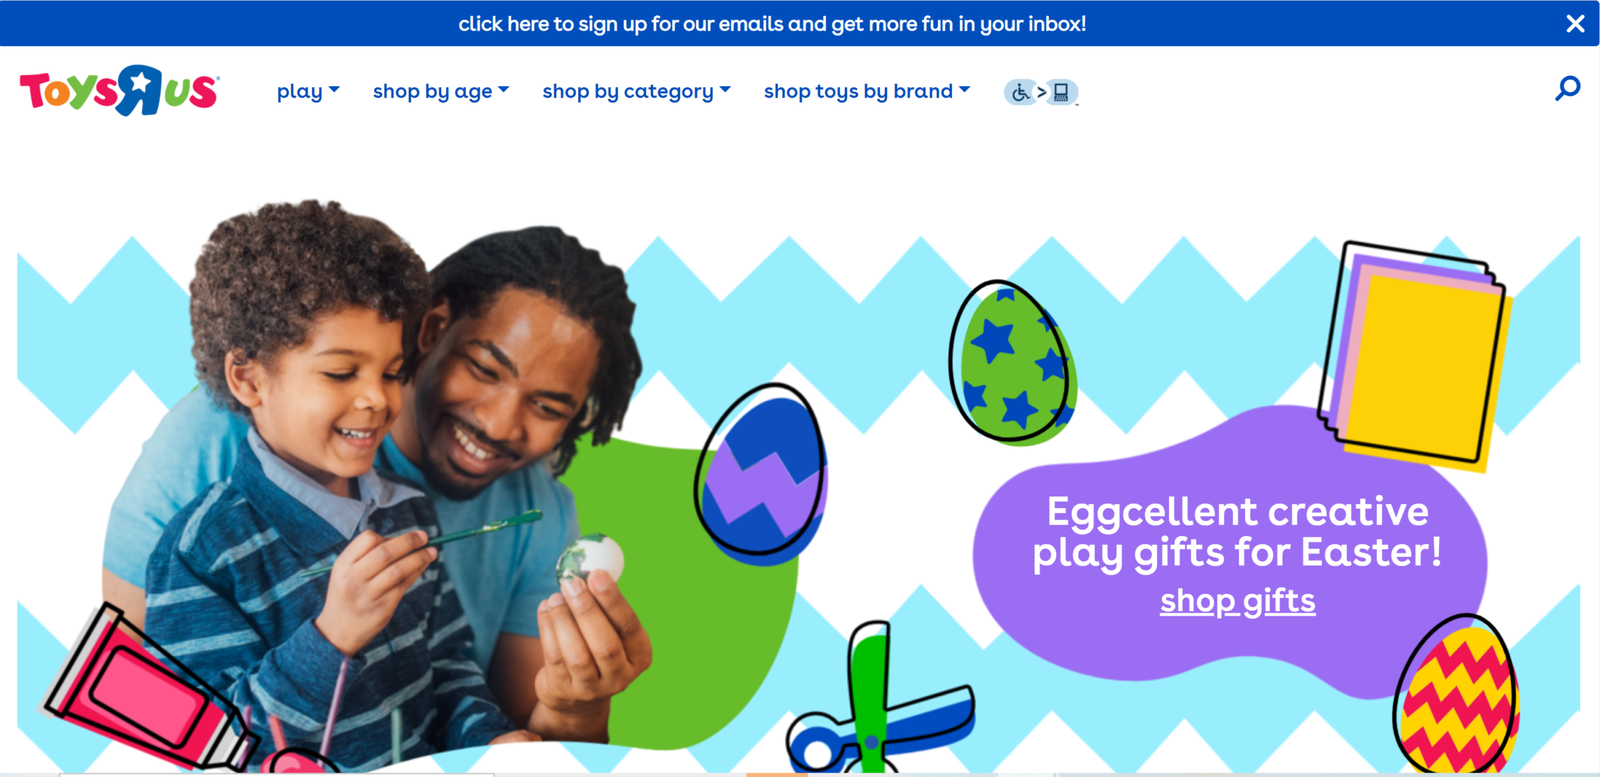 Toys “R” Us has launched a guest satisfaction survey online page. On this page, their customers can give their feedback on what they think of the product and service deliveries.